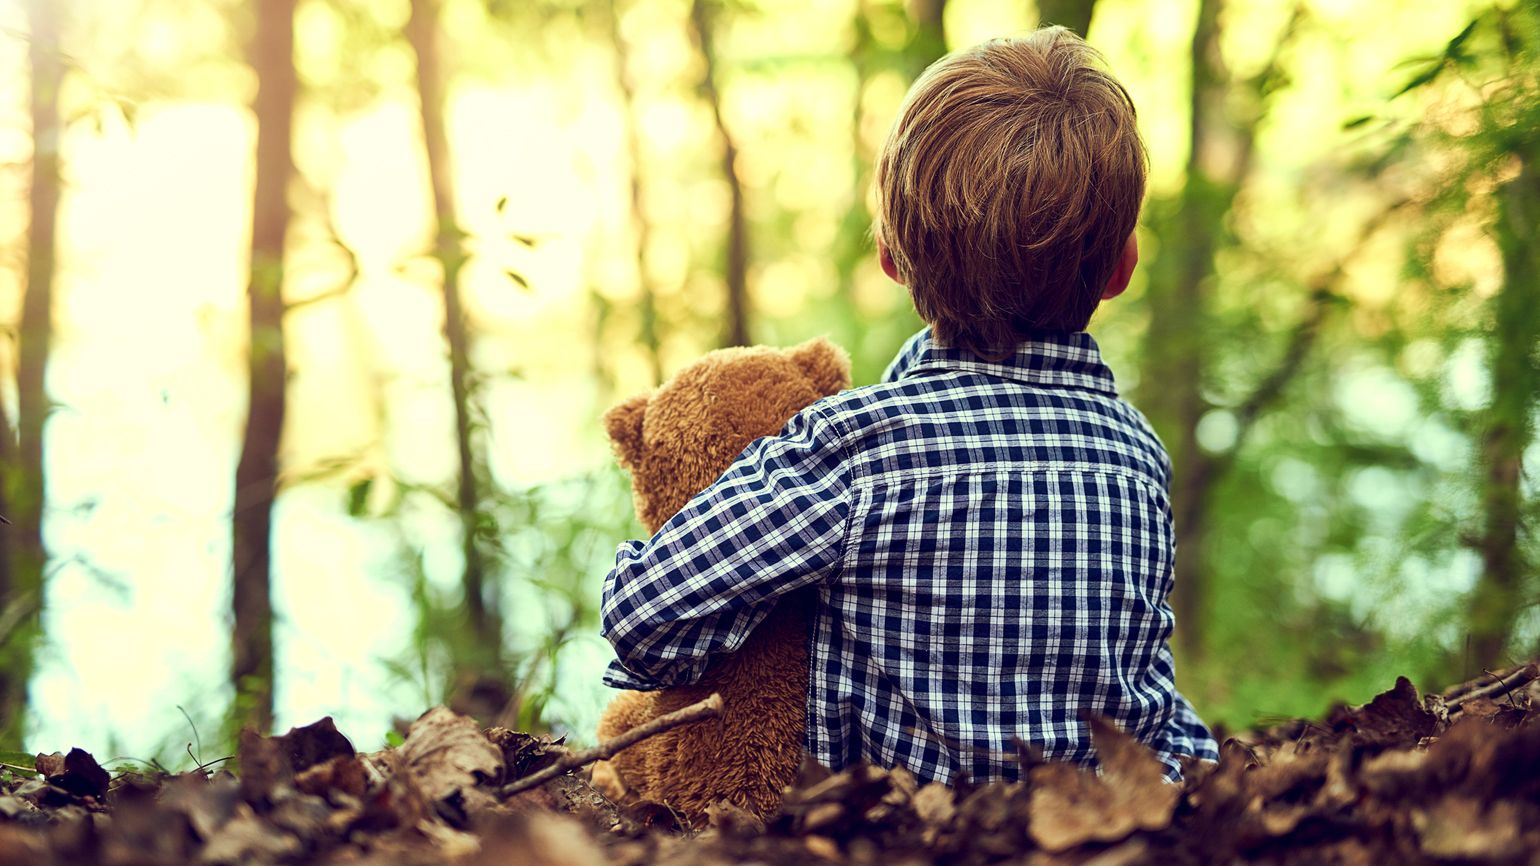 A young boy holding a teddy bear in a  forest.